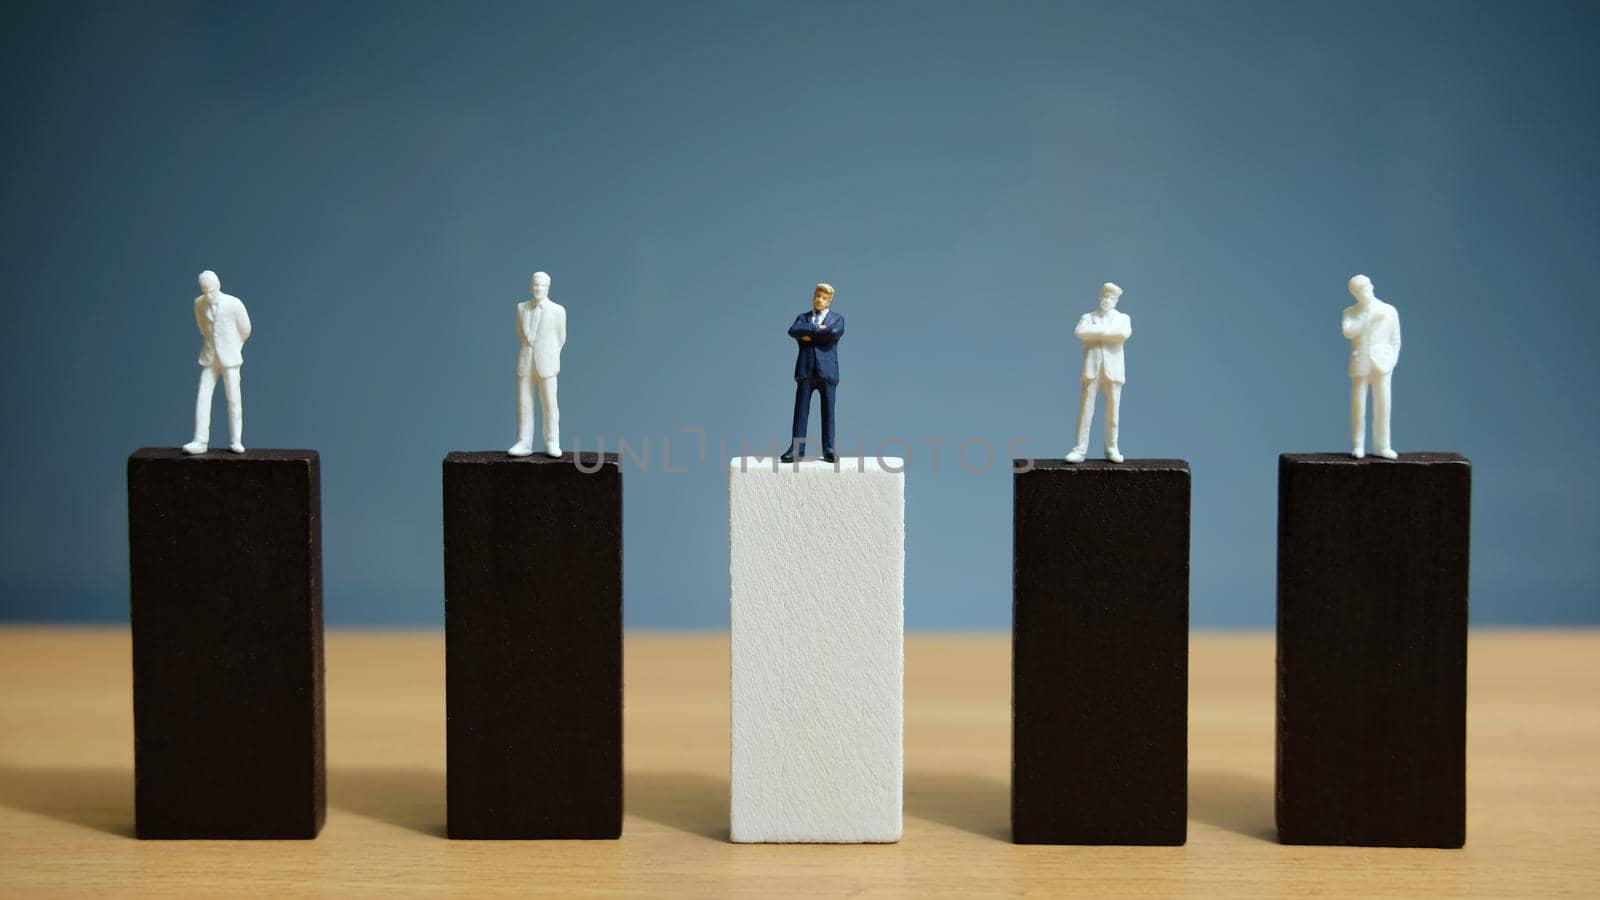 Business strategy conceptual photo – miniature of businessman stands on wooden wall. Image photo